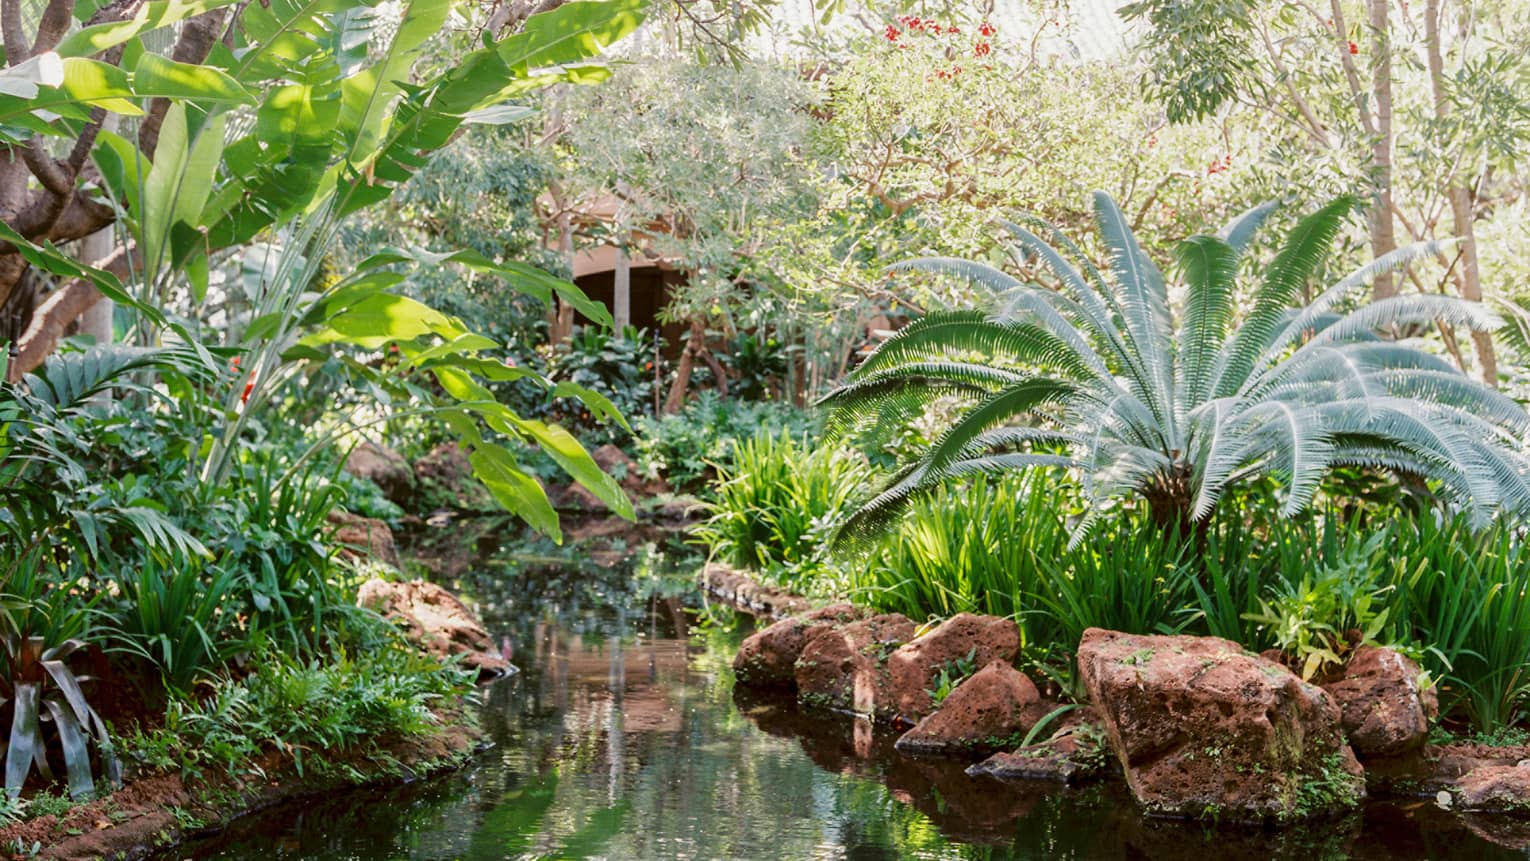 Tropical plants and rocks over garden pond